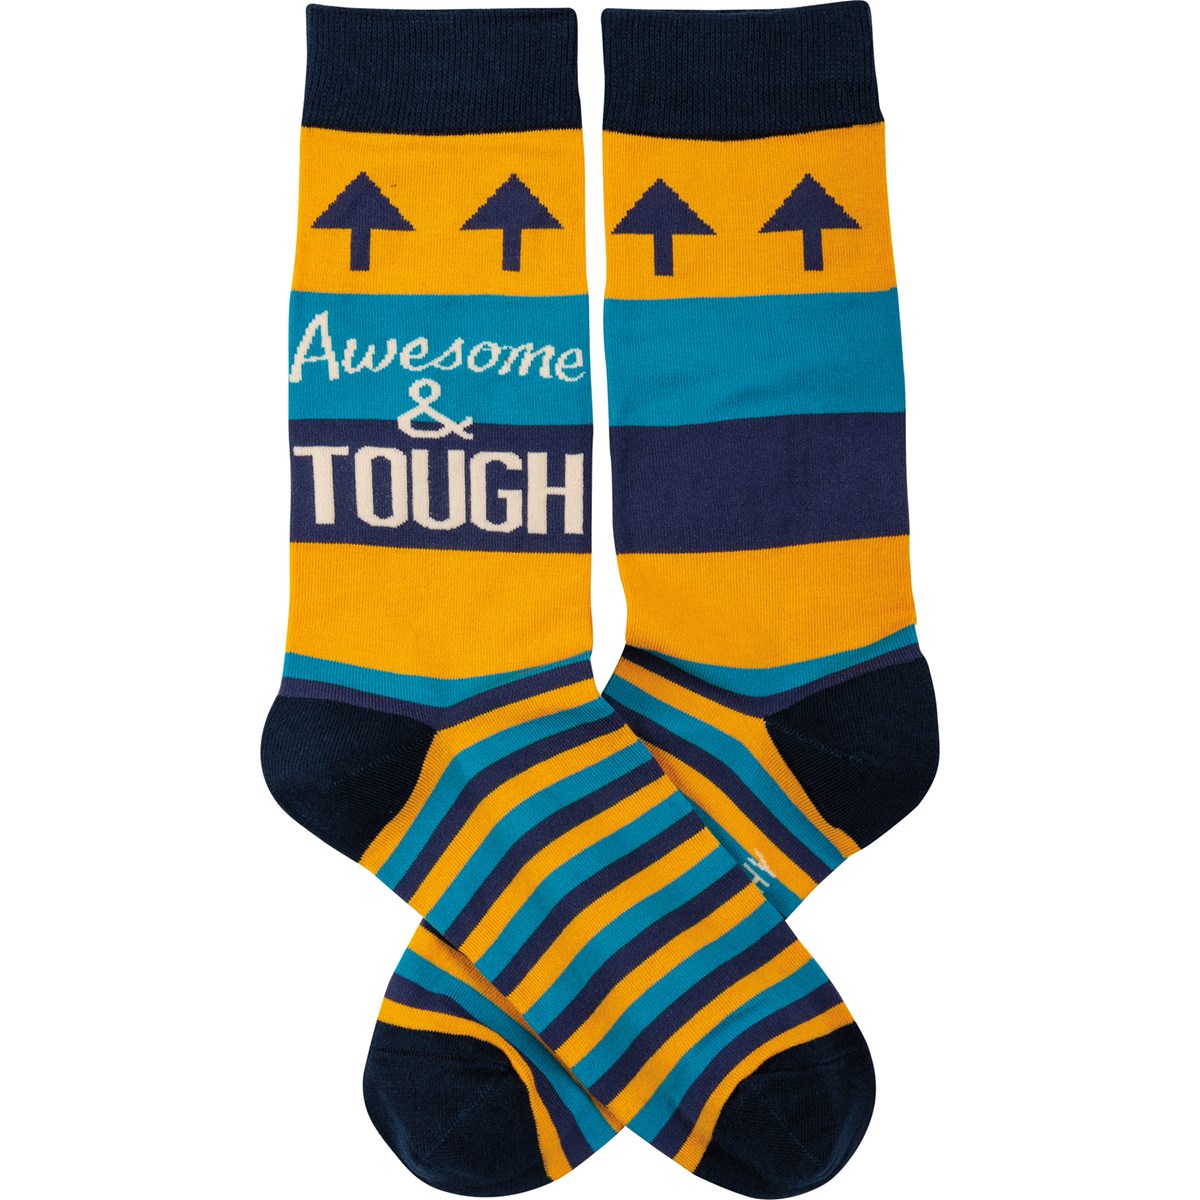 Socks - Awesome & Tough - One Size Fits Most - Cotton, Nylon, Spandex